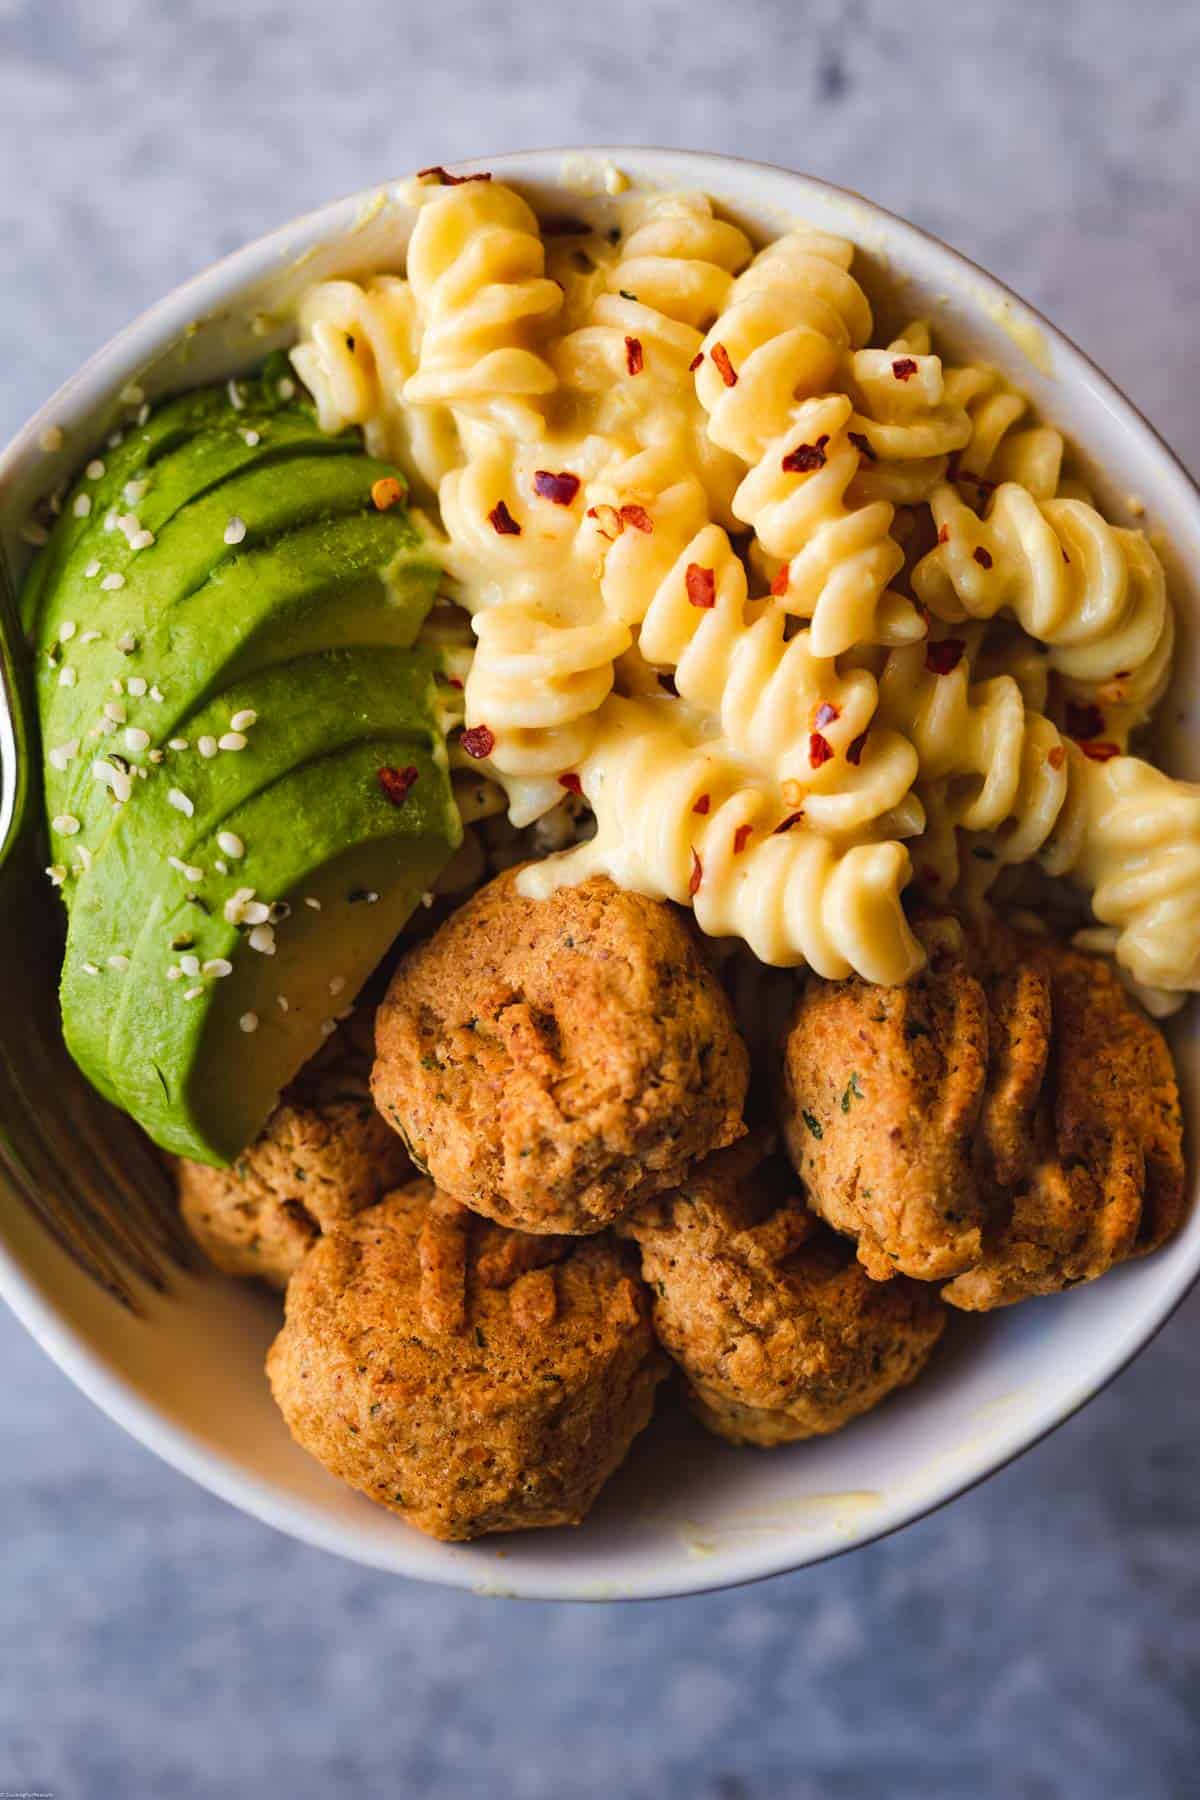 Chickpea patties, vegan cheesy pasta, and sliced avocado in a bowl.